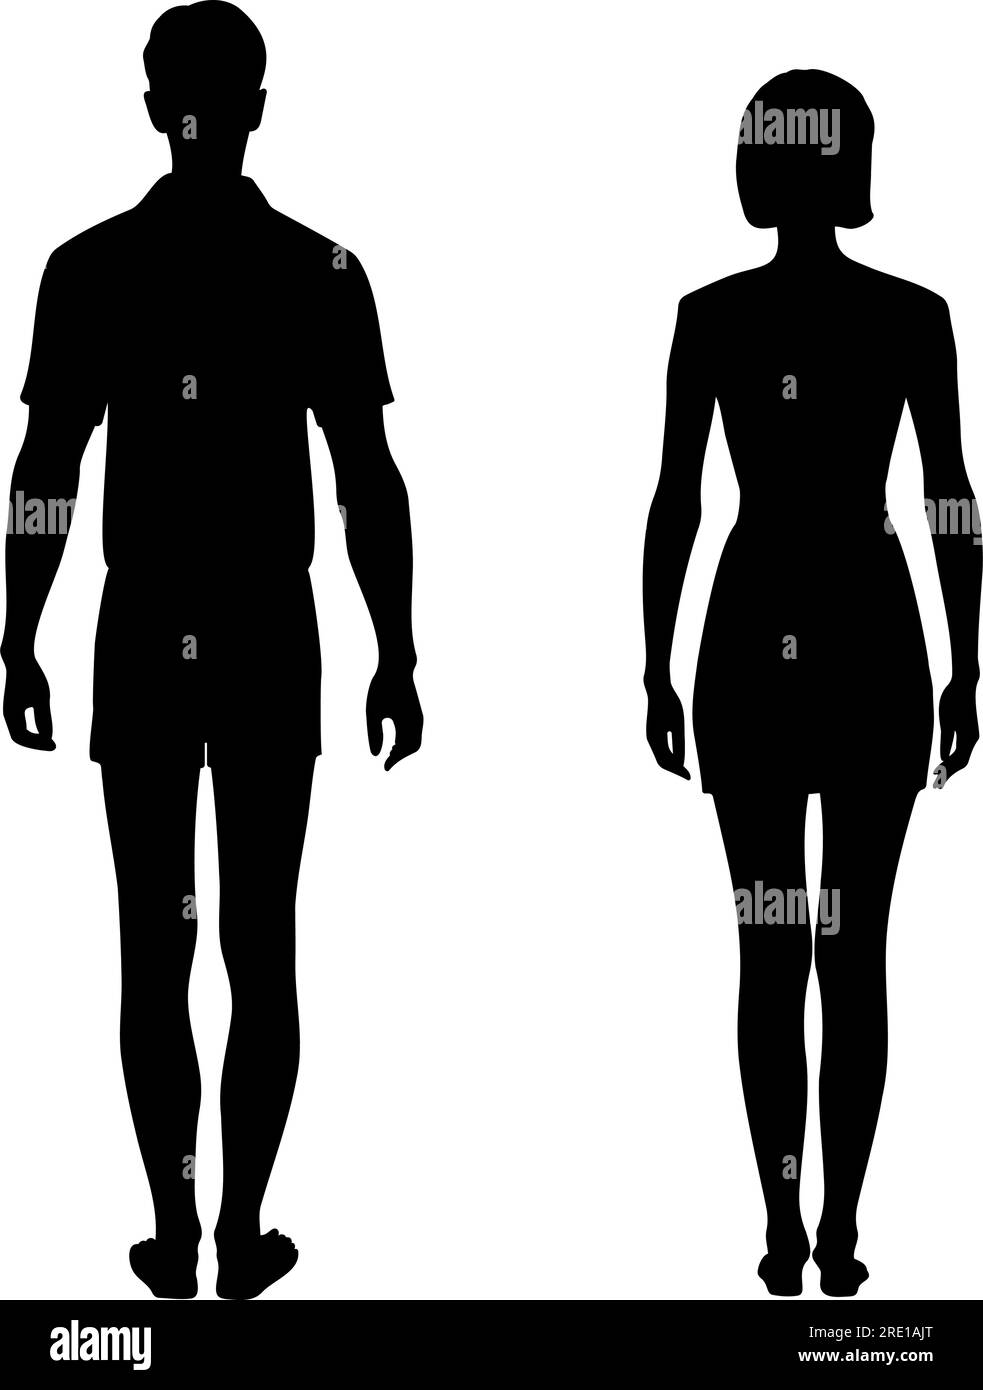 Man and woman standing together silhouette. Full Vector illustration Stock Vector